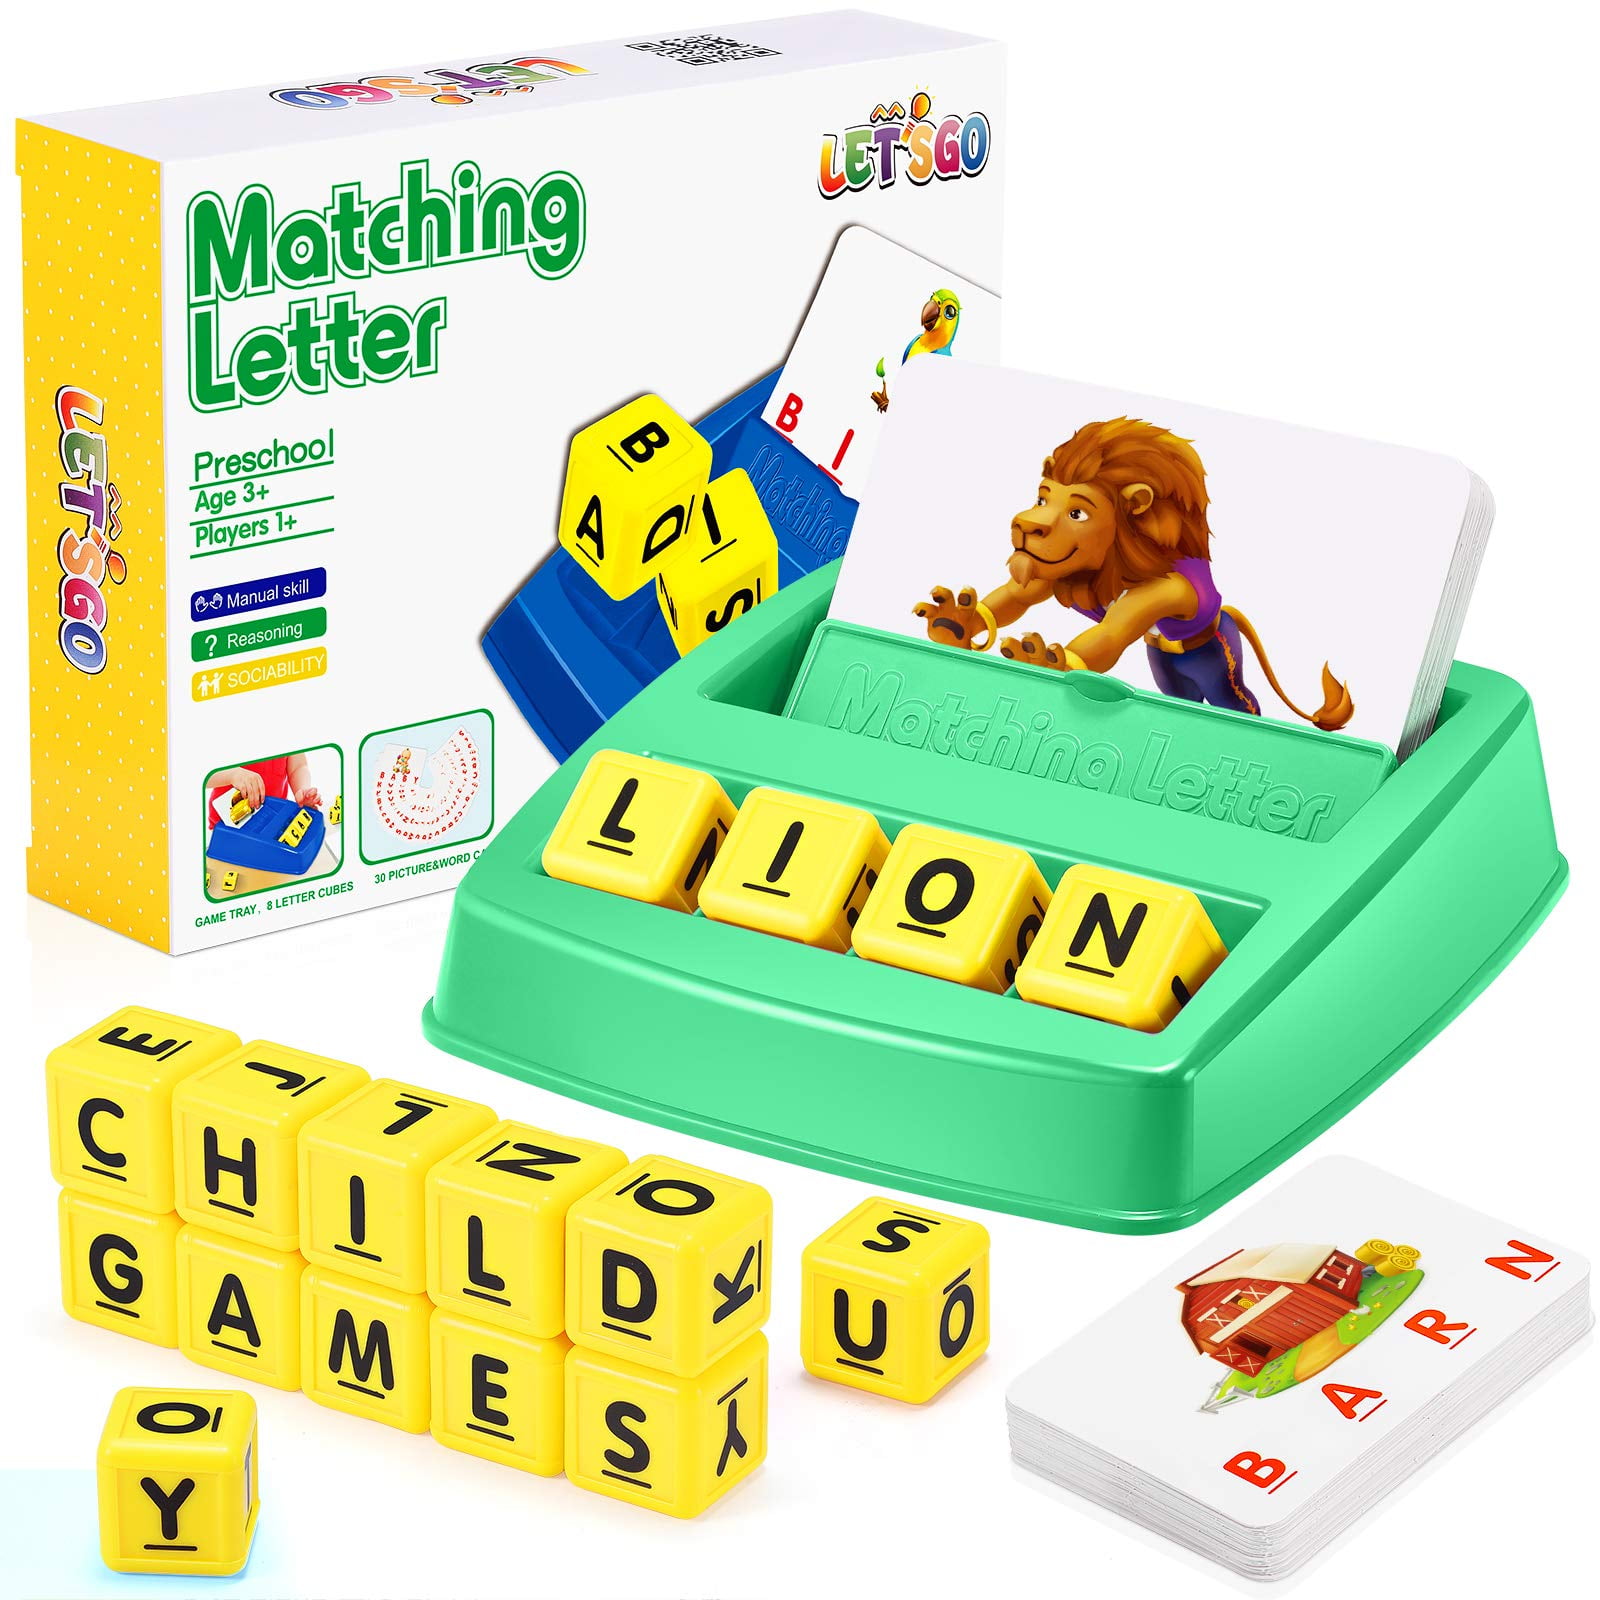 Matching Letter Educational Learning Spell Game for kids 3-8 year Old Good gift 